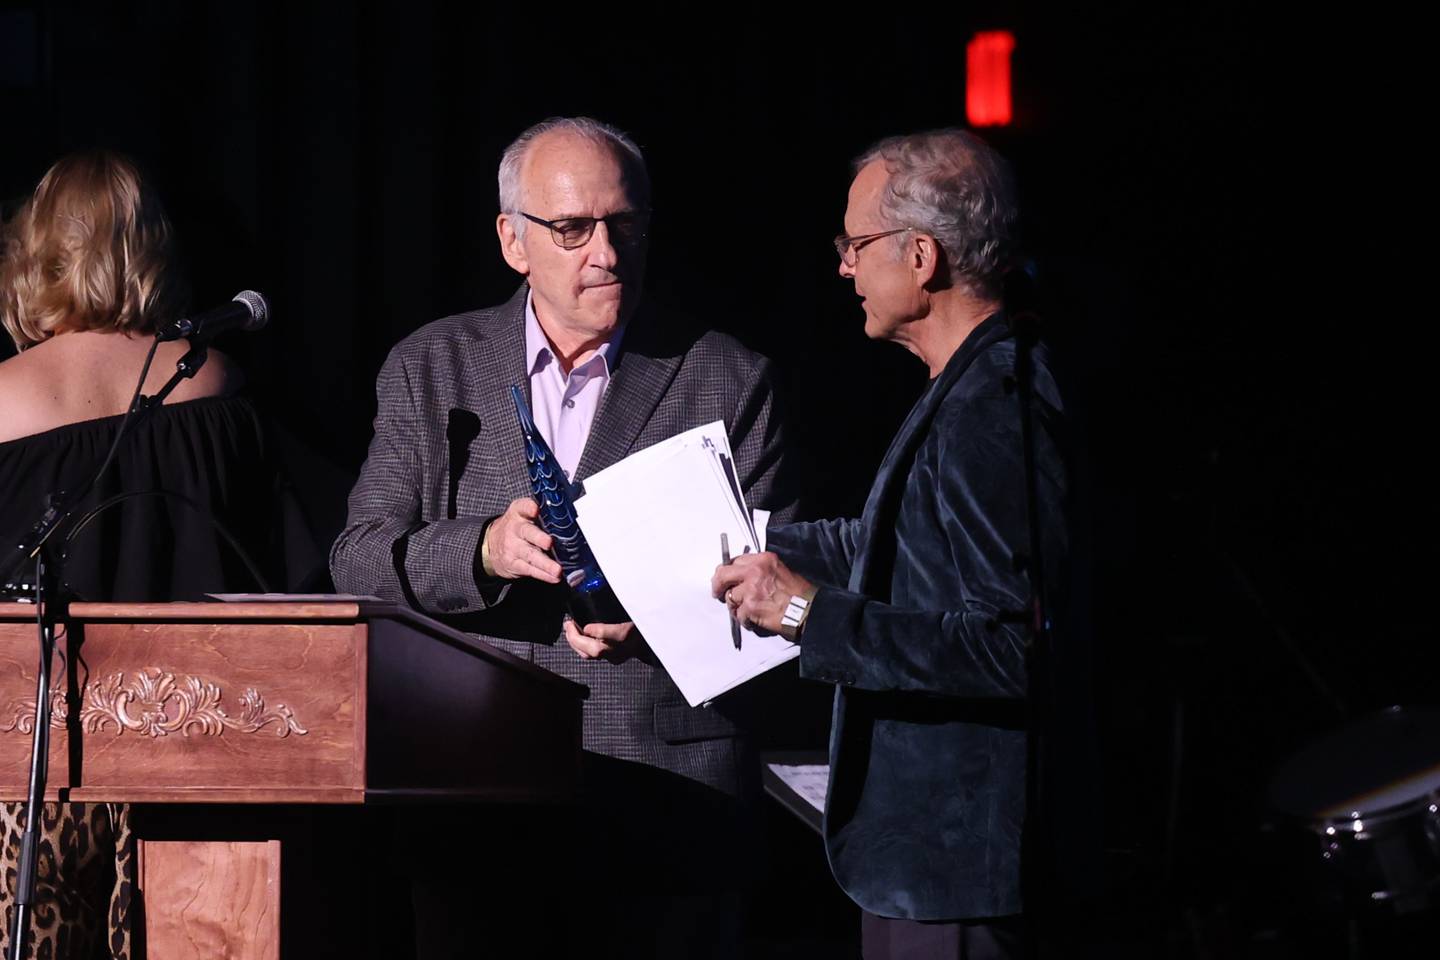 John “Record” Landecker, legendary Chicago radio personality, presents the Hall of Fame award to his friend and former co-worker Bob Sirott, longtime Chicago radio and television personality, at the 3rd Annual Illinois Rock & Roll Museum Hall of Fame Induction Ceremony on Sunday, Sept. 17, in Joliet.